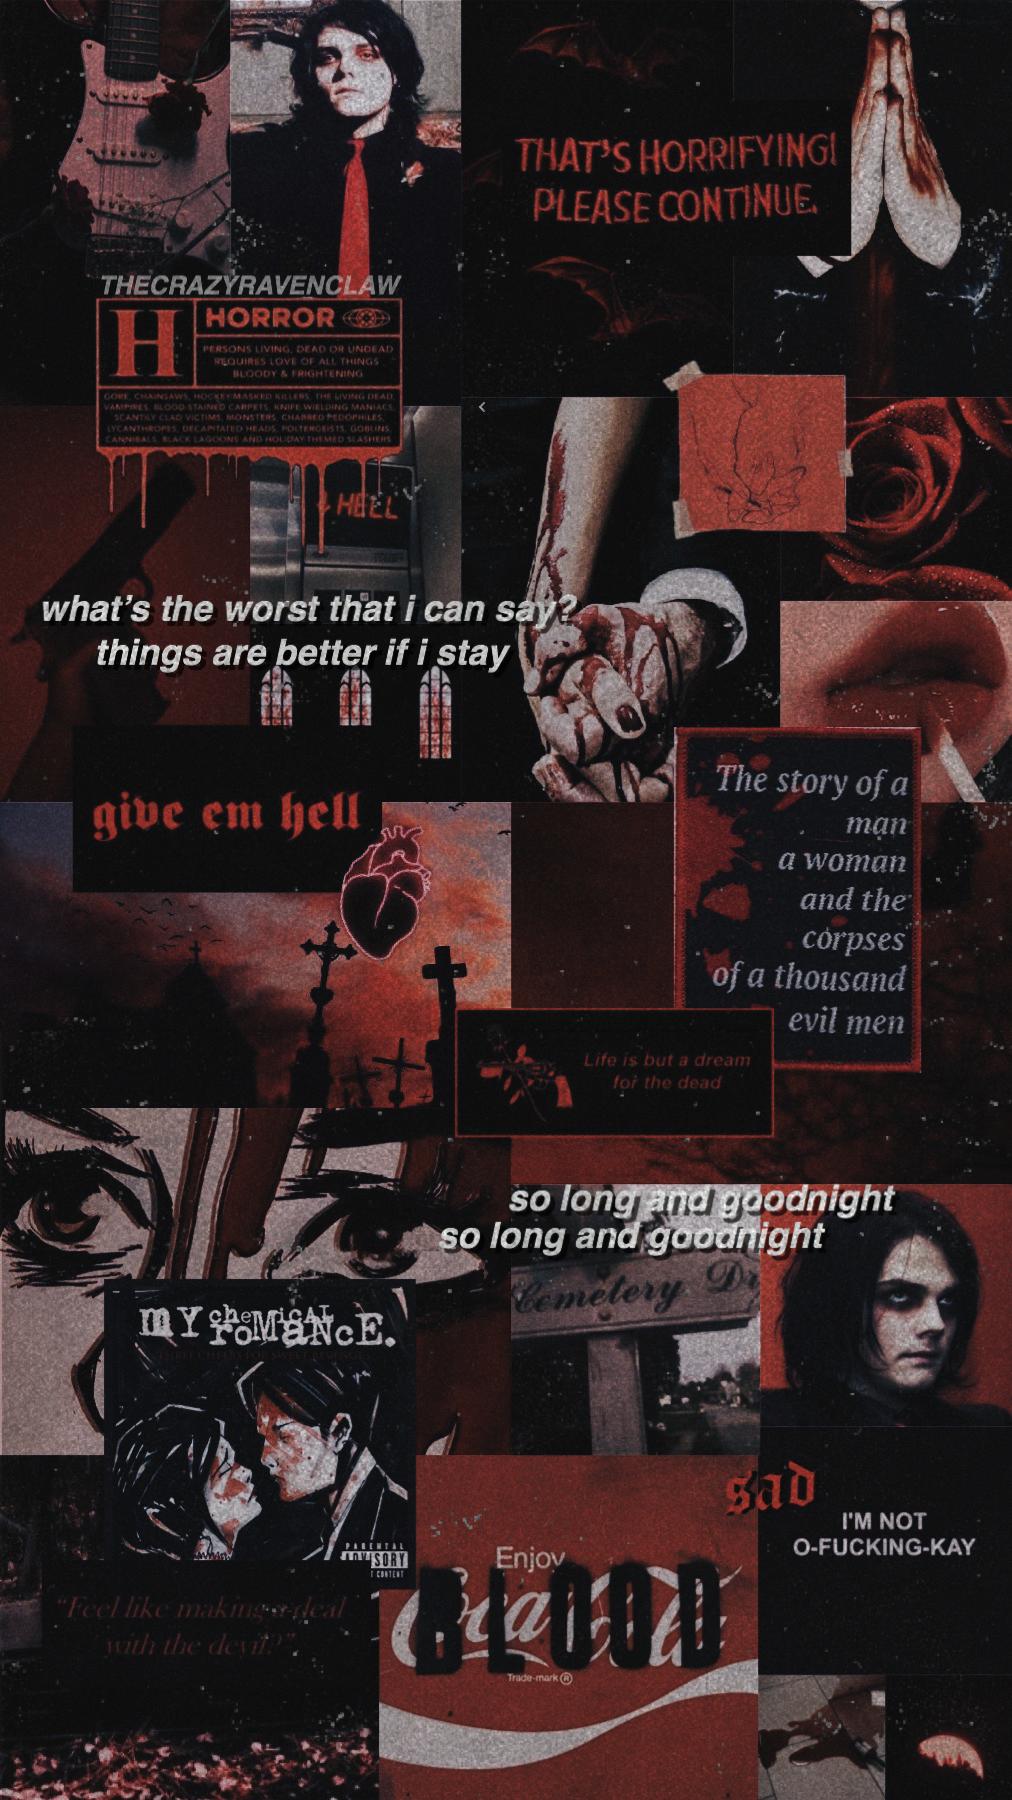 i know all im posting is mcr stuff but i cant stop im so sorry-
anyways i don’t know the whole story behind three cheers but it seems v interesting, i love me a good tragedy (cough cough tsoa cough) so i might look into it a lil more
woah short caption😳